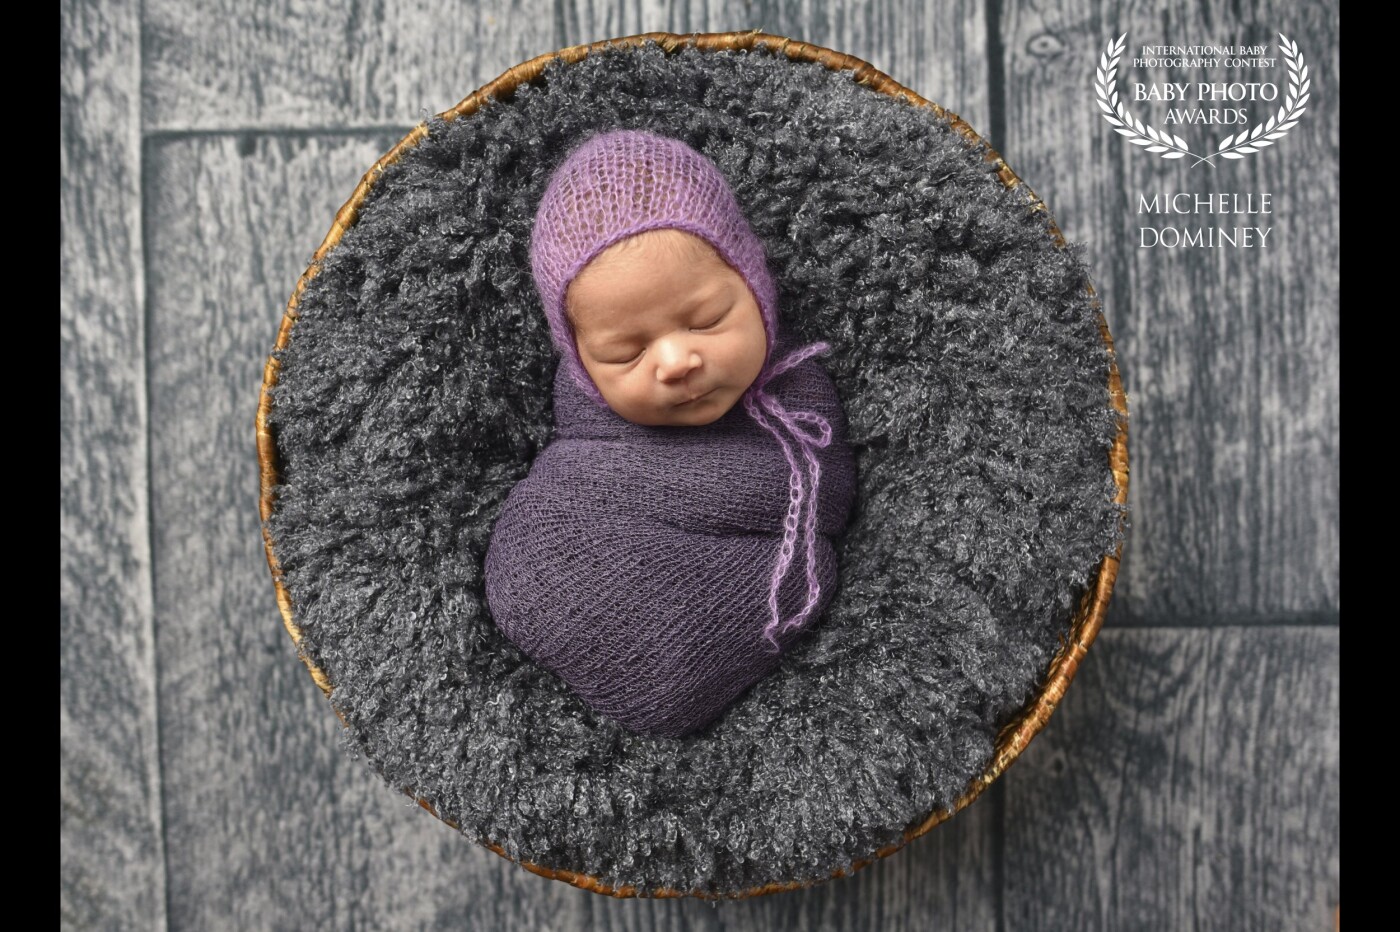 She was 8 days earth side when we met in my home studio.  They traveled from about 2.5 hours to come to me, which is very flattering:)  Baby girl Ande was not interested in sleeping most of the session, until about 3/4 through our session when I nestled her into this basket, she went straight to sleep and let me capture this beautiful photo of her <3